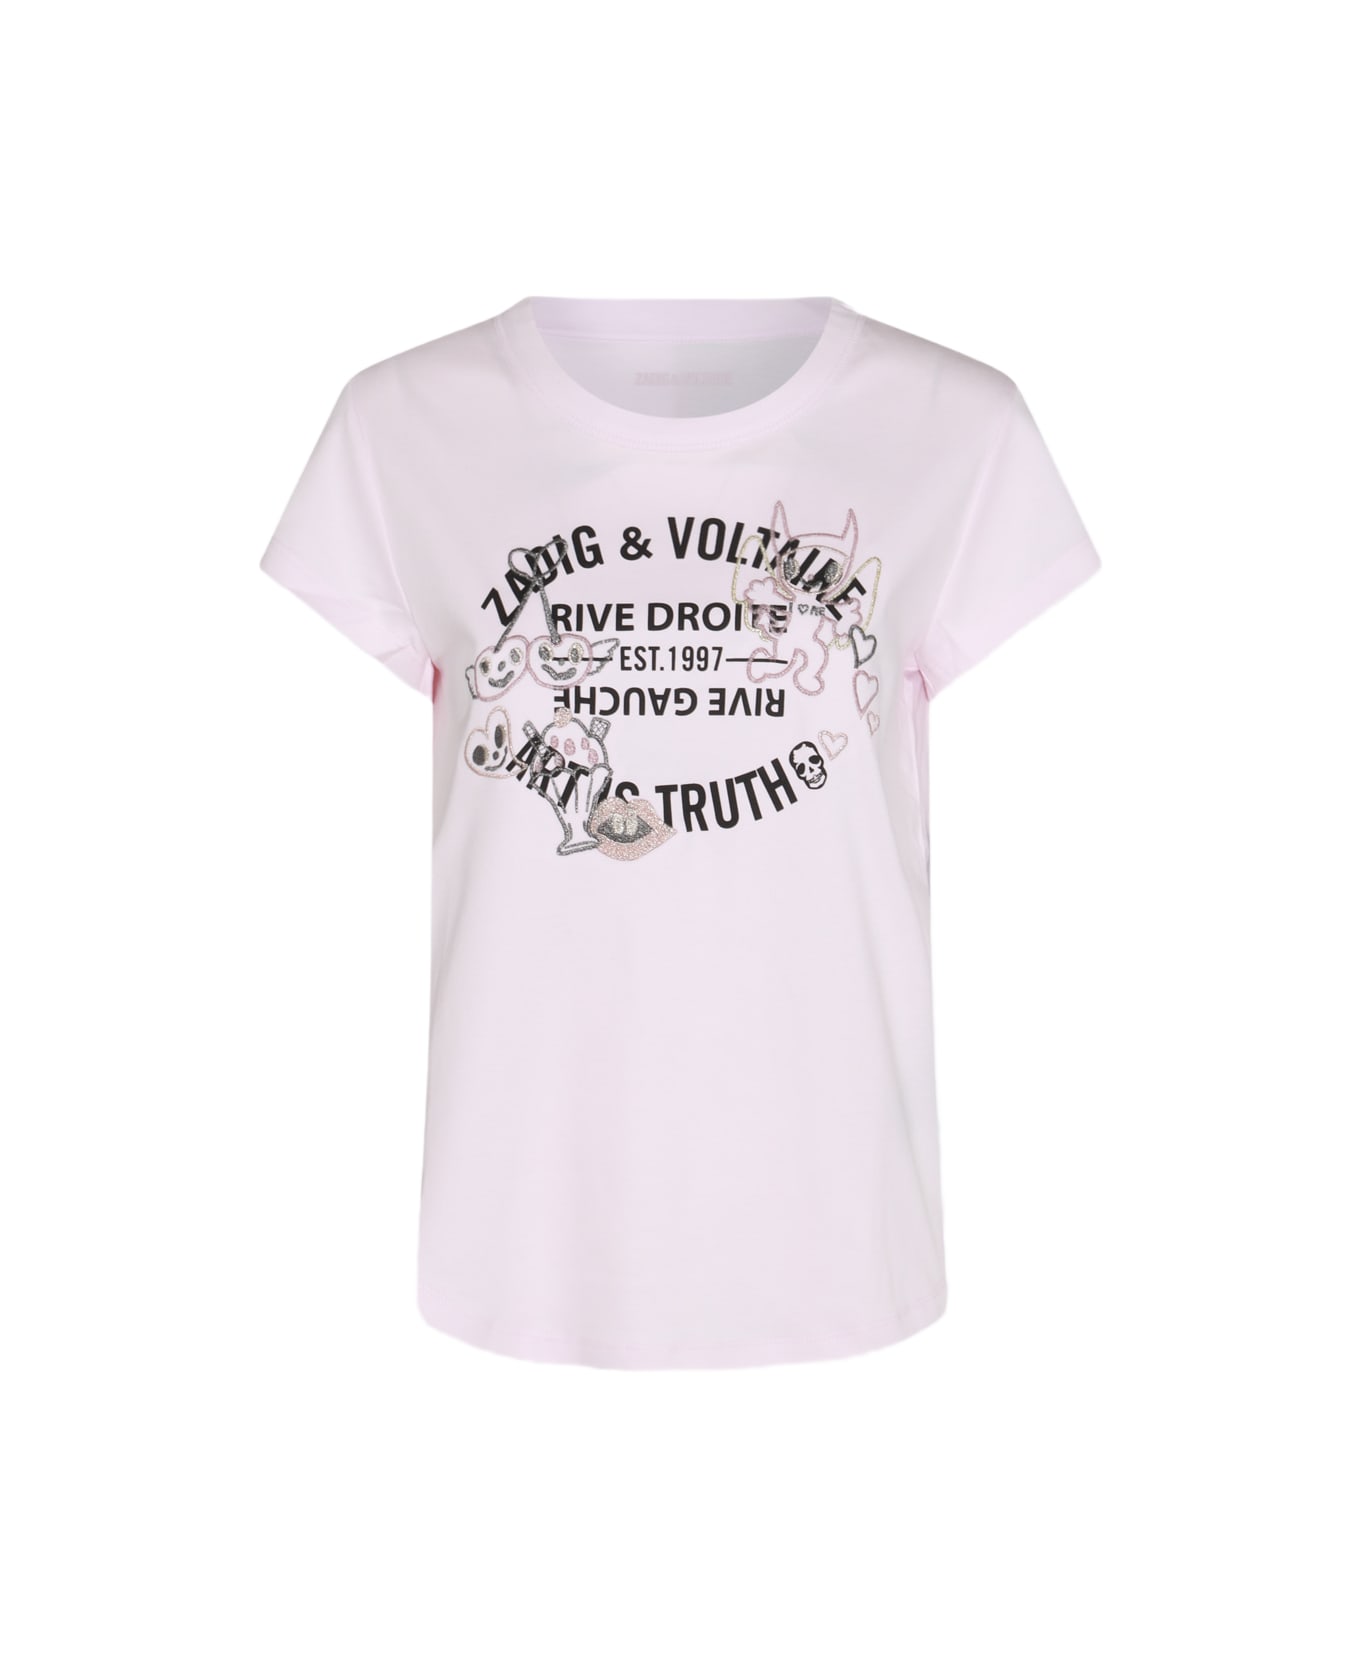 Zadig & Voltaire Pink And Black Cotton T-shirt - PARME Tシャツ